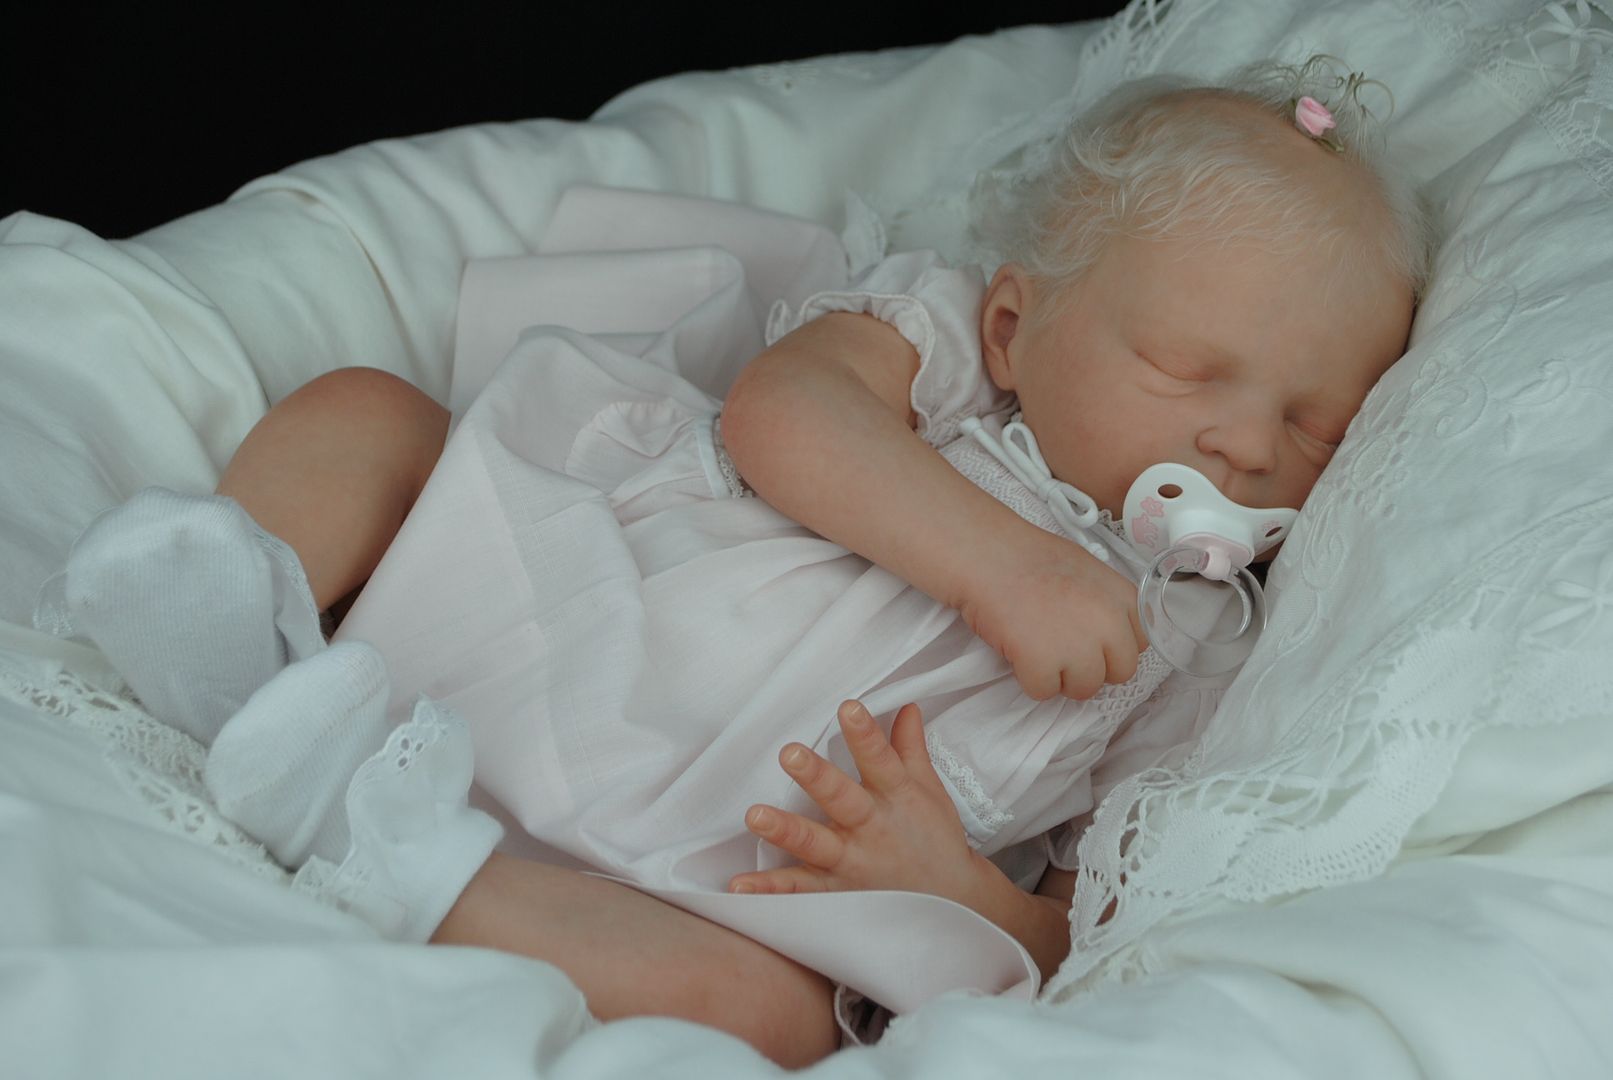   Limited Edition Victoria Sculpt by Olga Auer Reborn Baby Girl